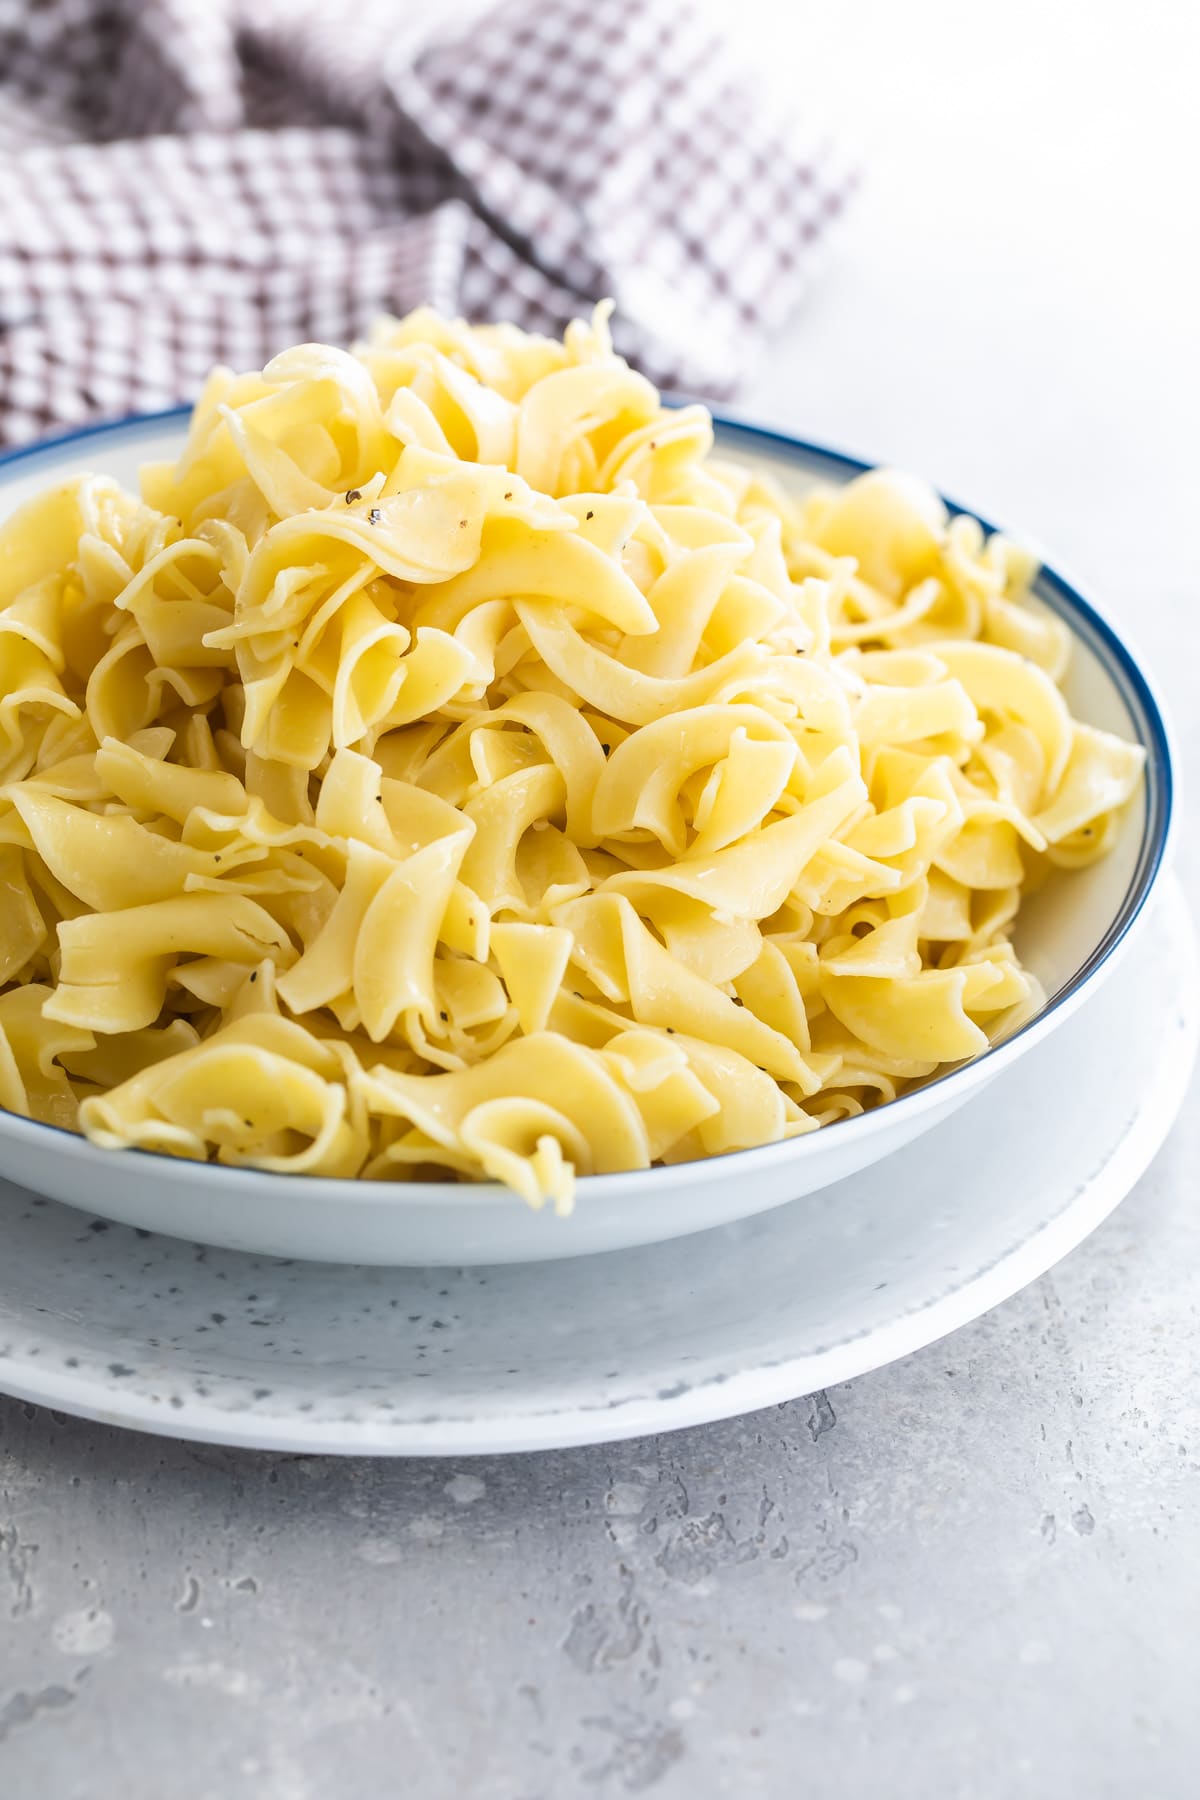 A bowl of buttered noodles.